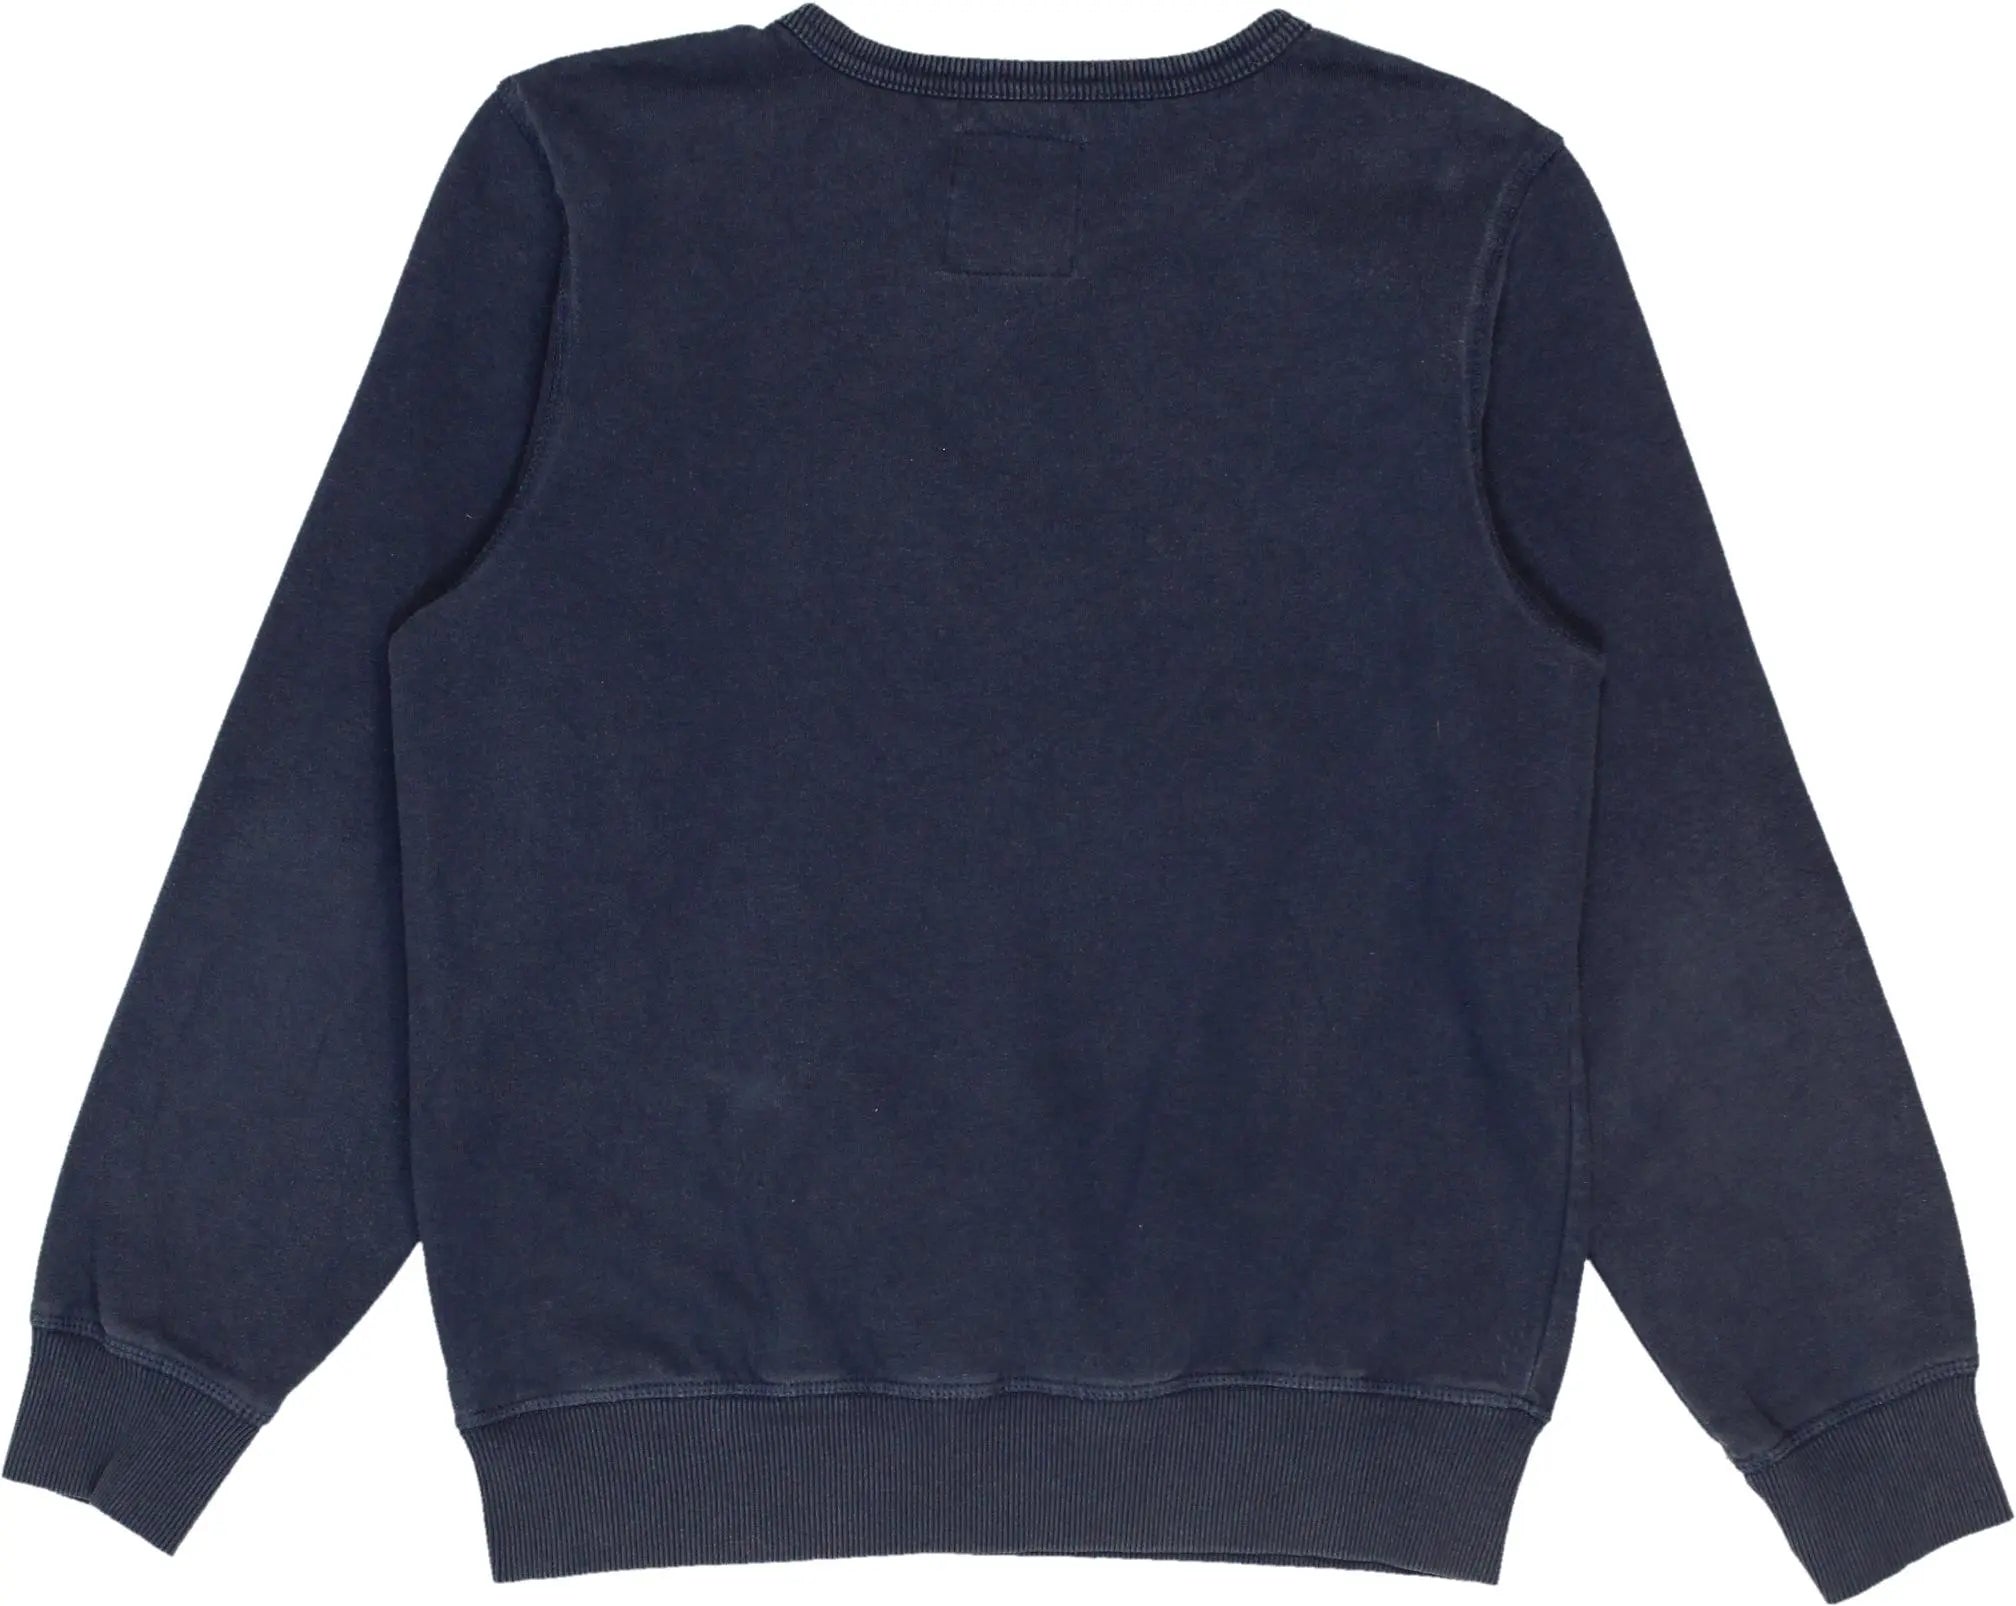 Levi's - Levi's Sweater- ThriftTale.com - Vintage and second handclothing